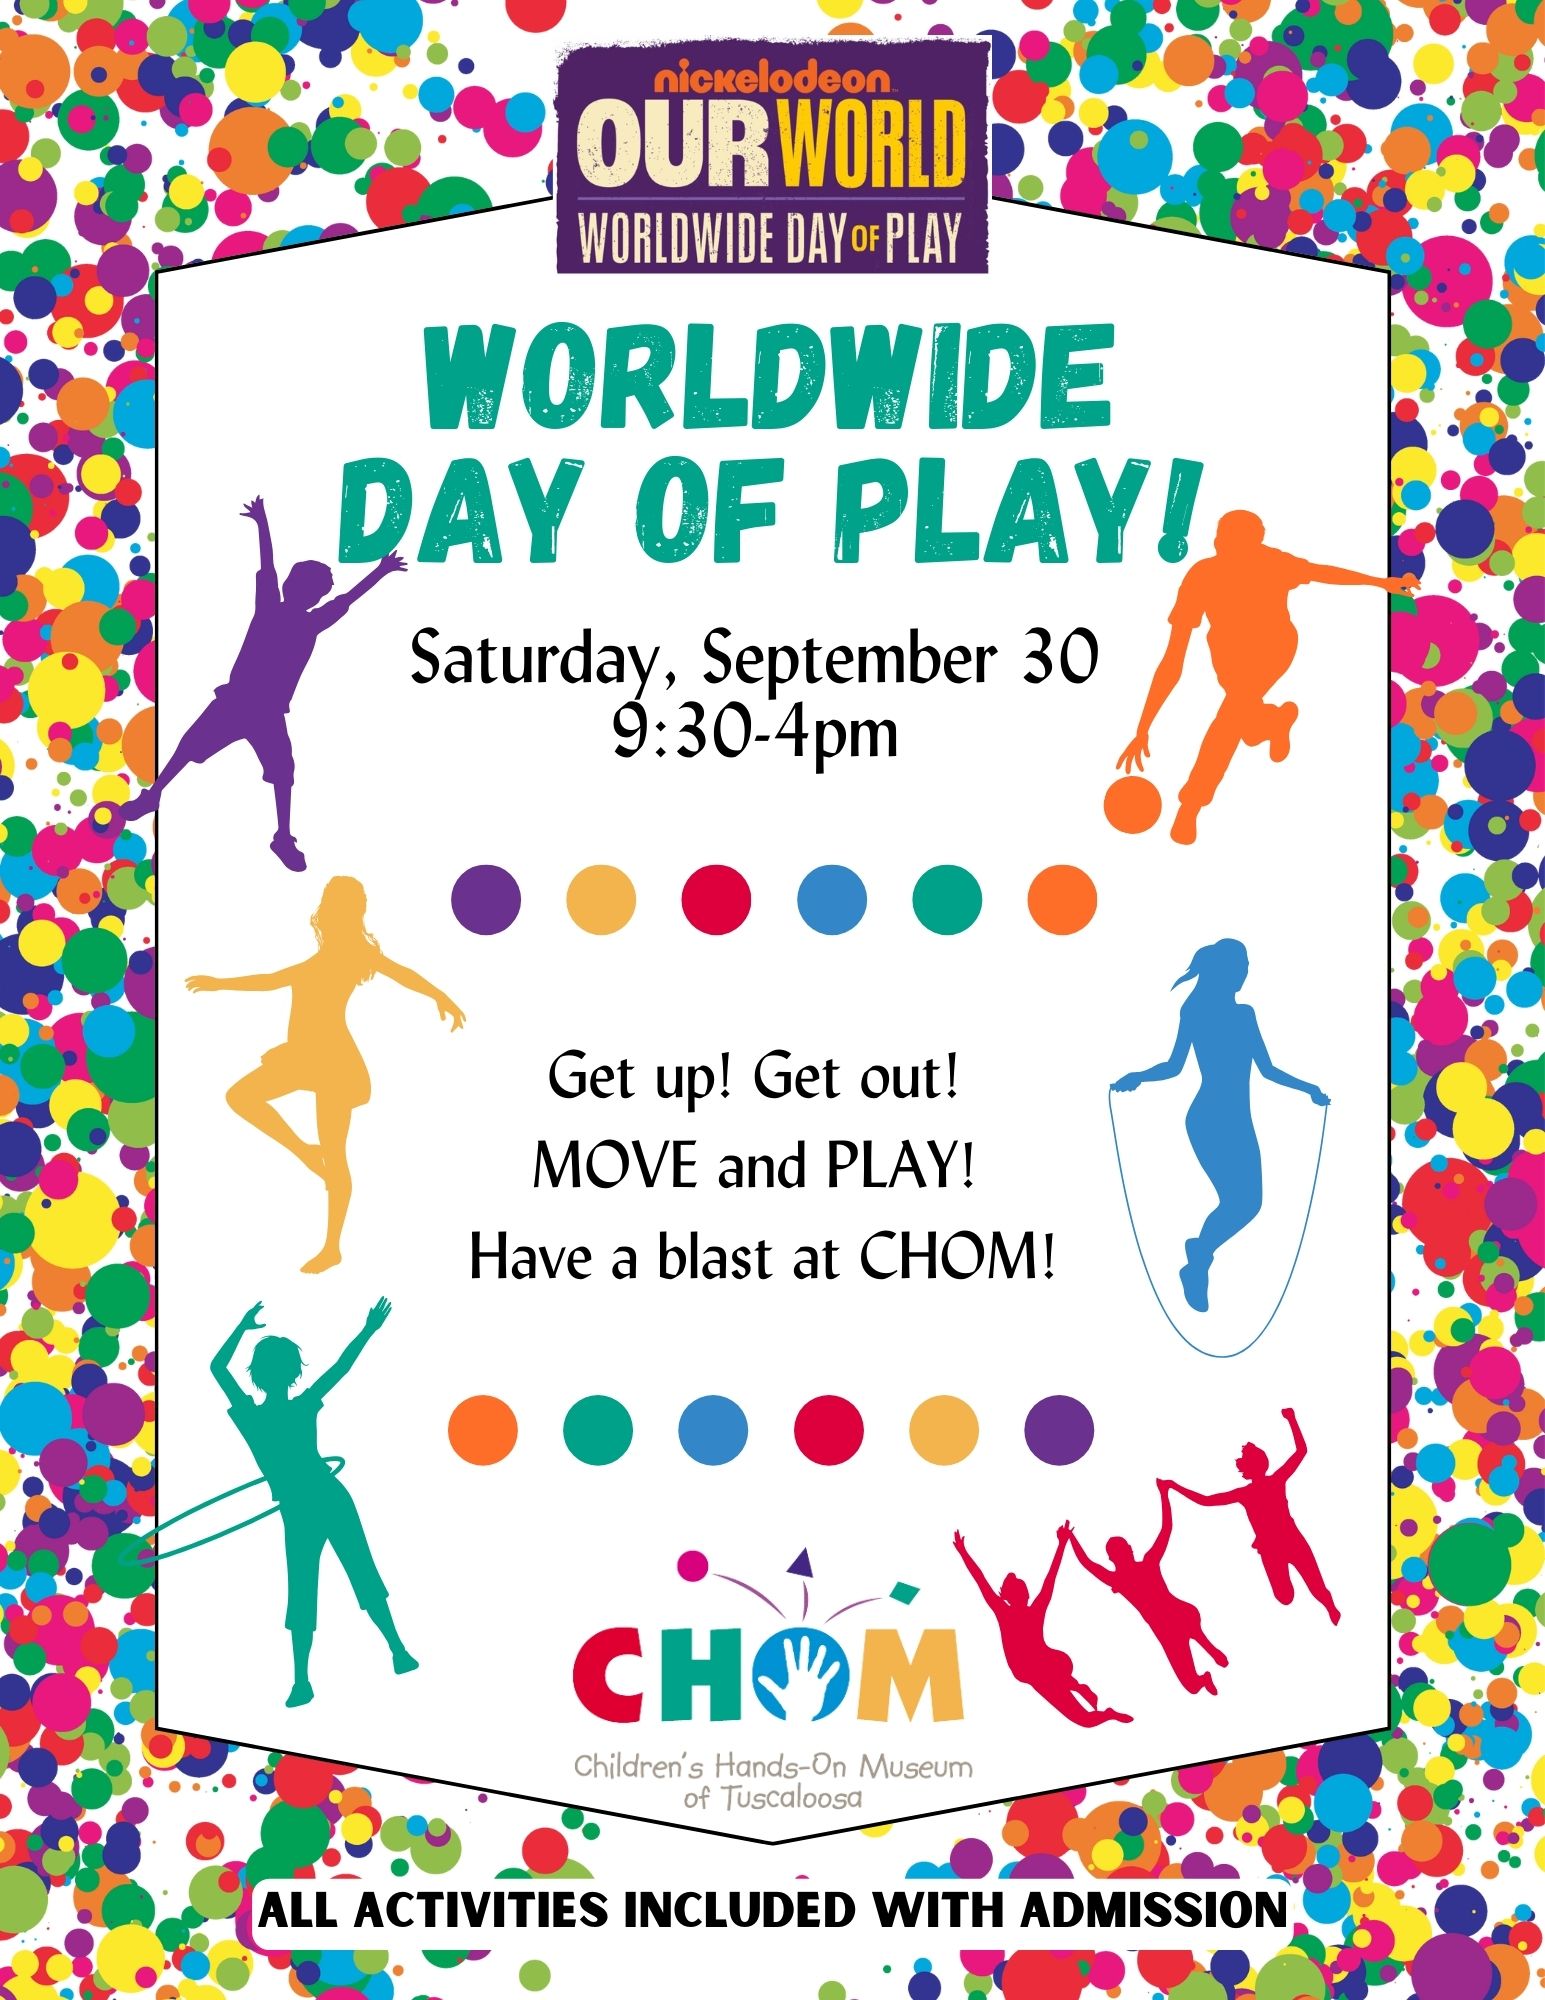 Worldwide Day of Play